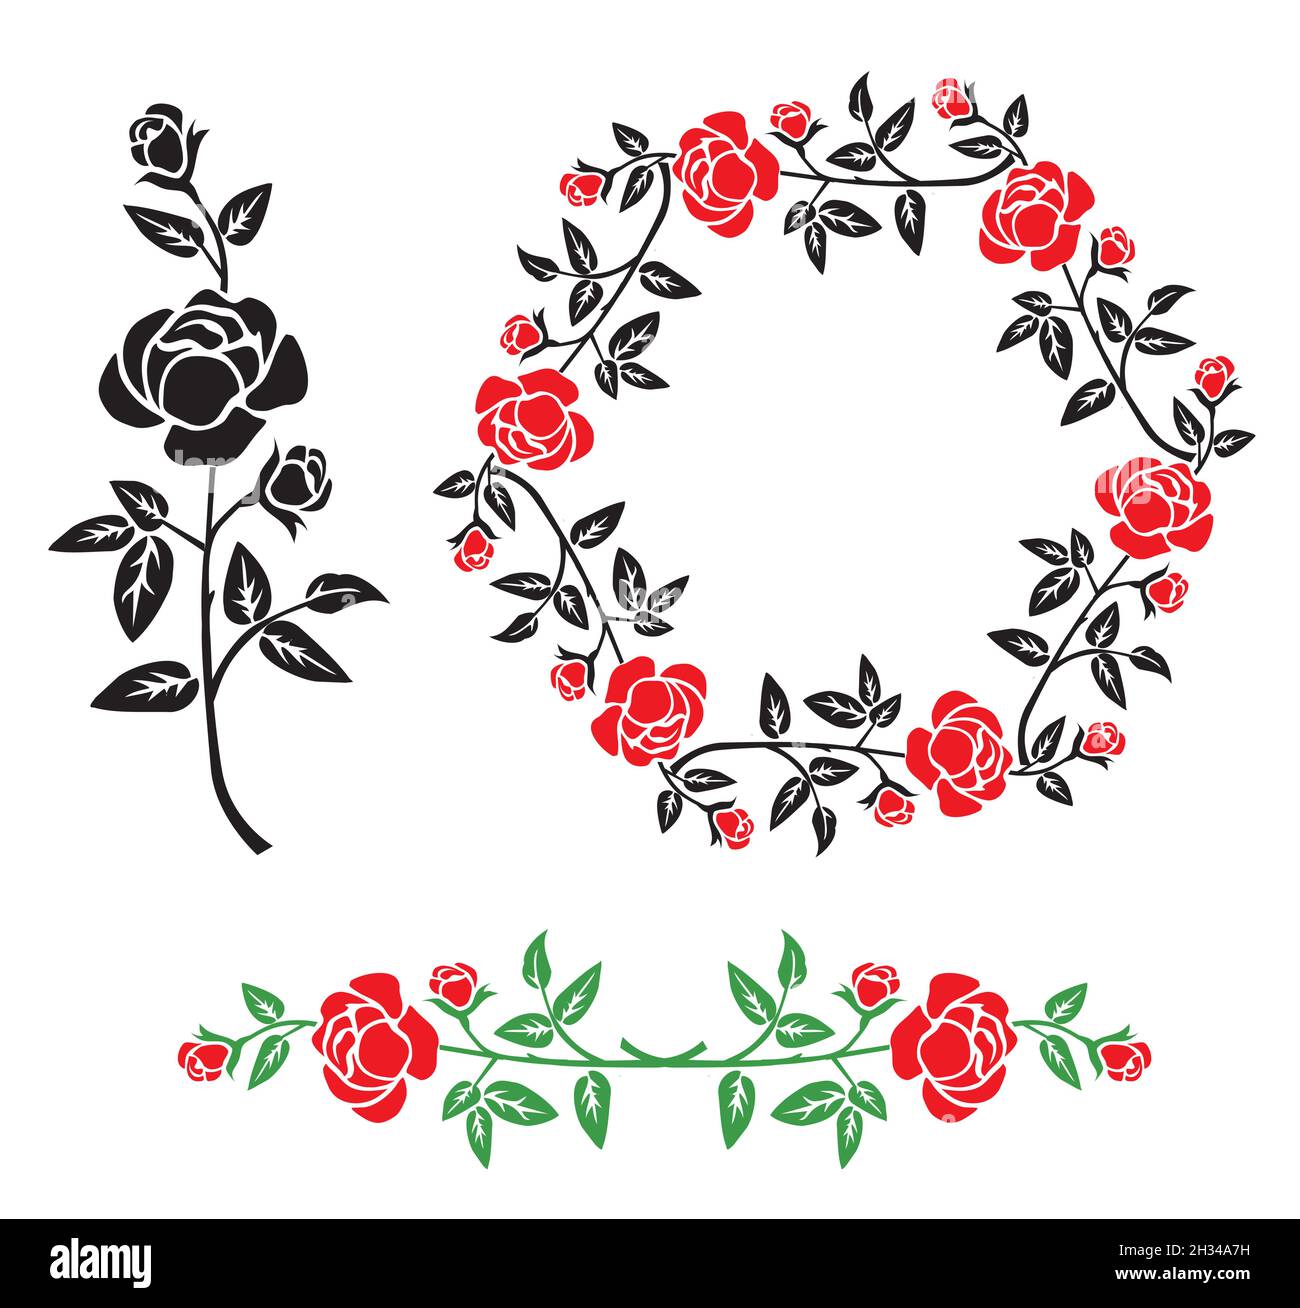 Rose silhouette, decorative motive. Stylized Illustration of rose design elements.Vector available. Stock Vector